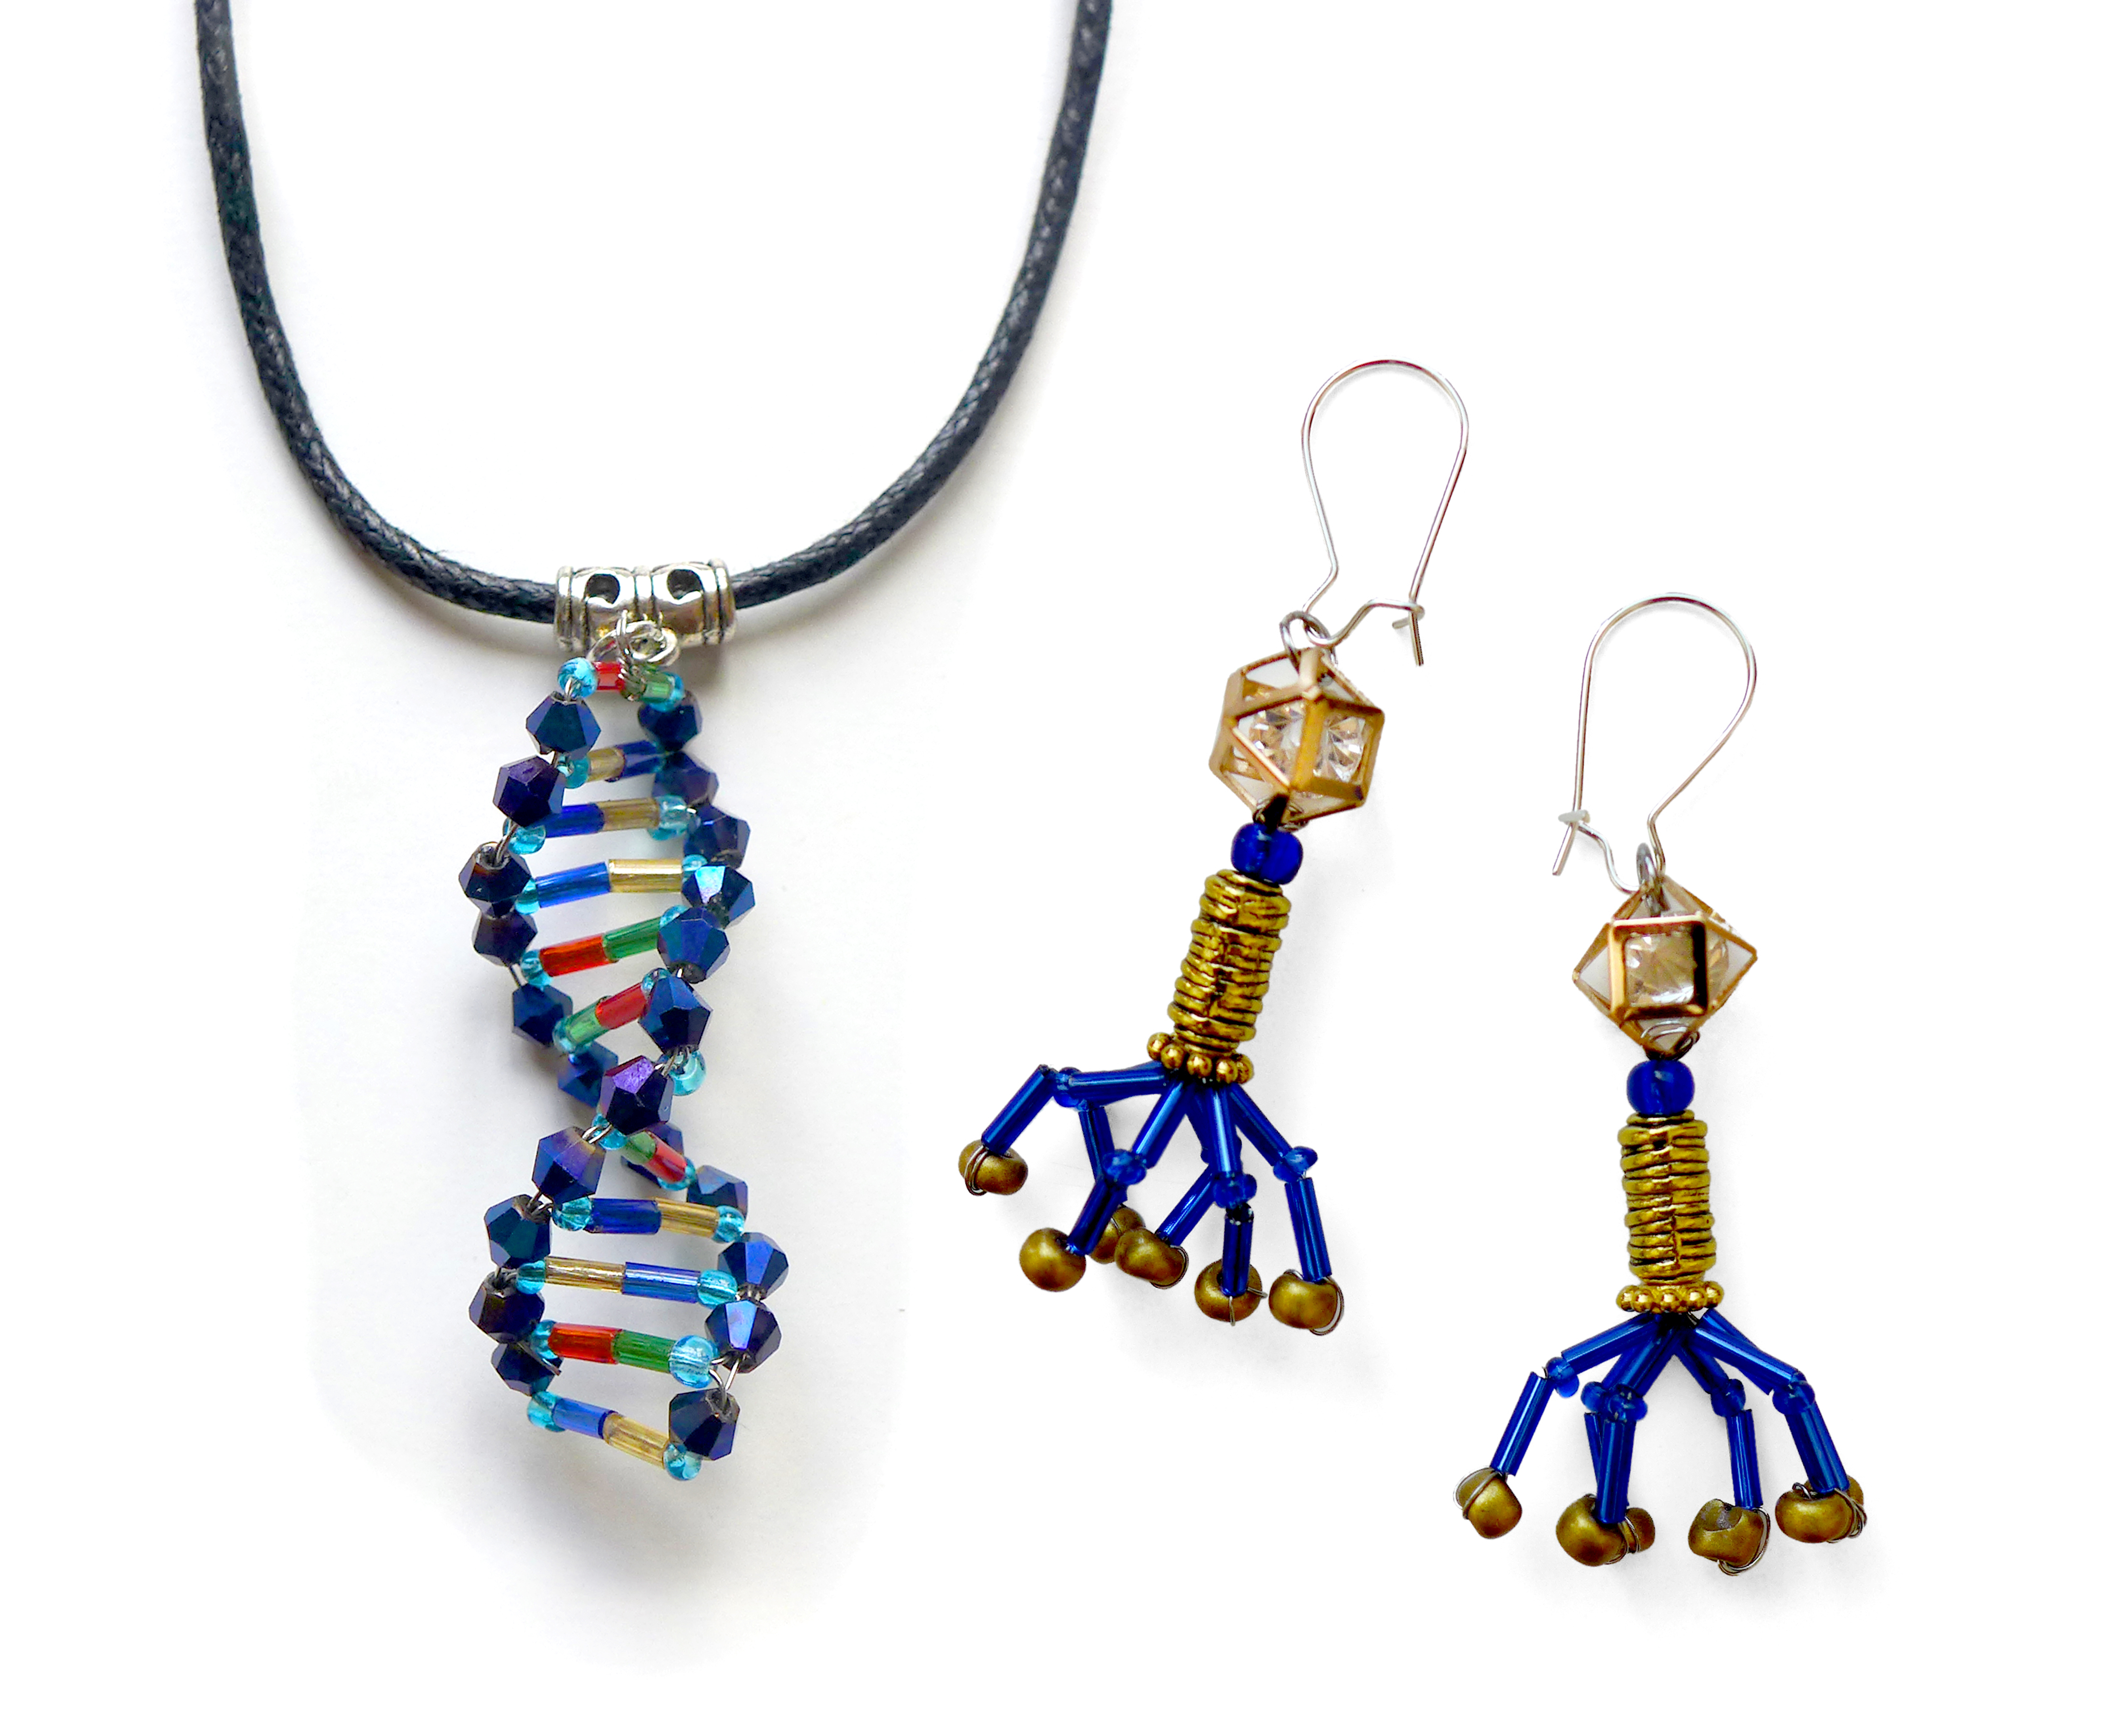 Beata Mierzwa, DNA Necklace, Bacteriophage earrings